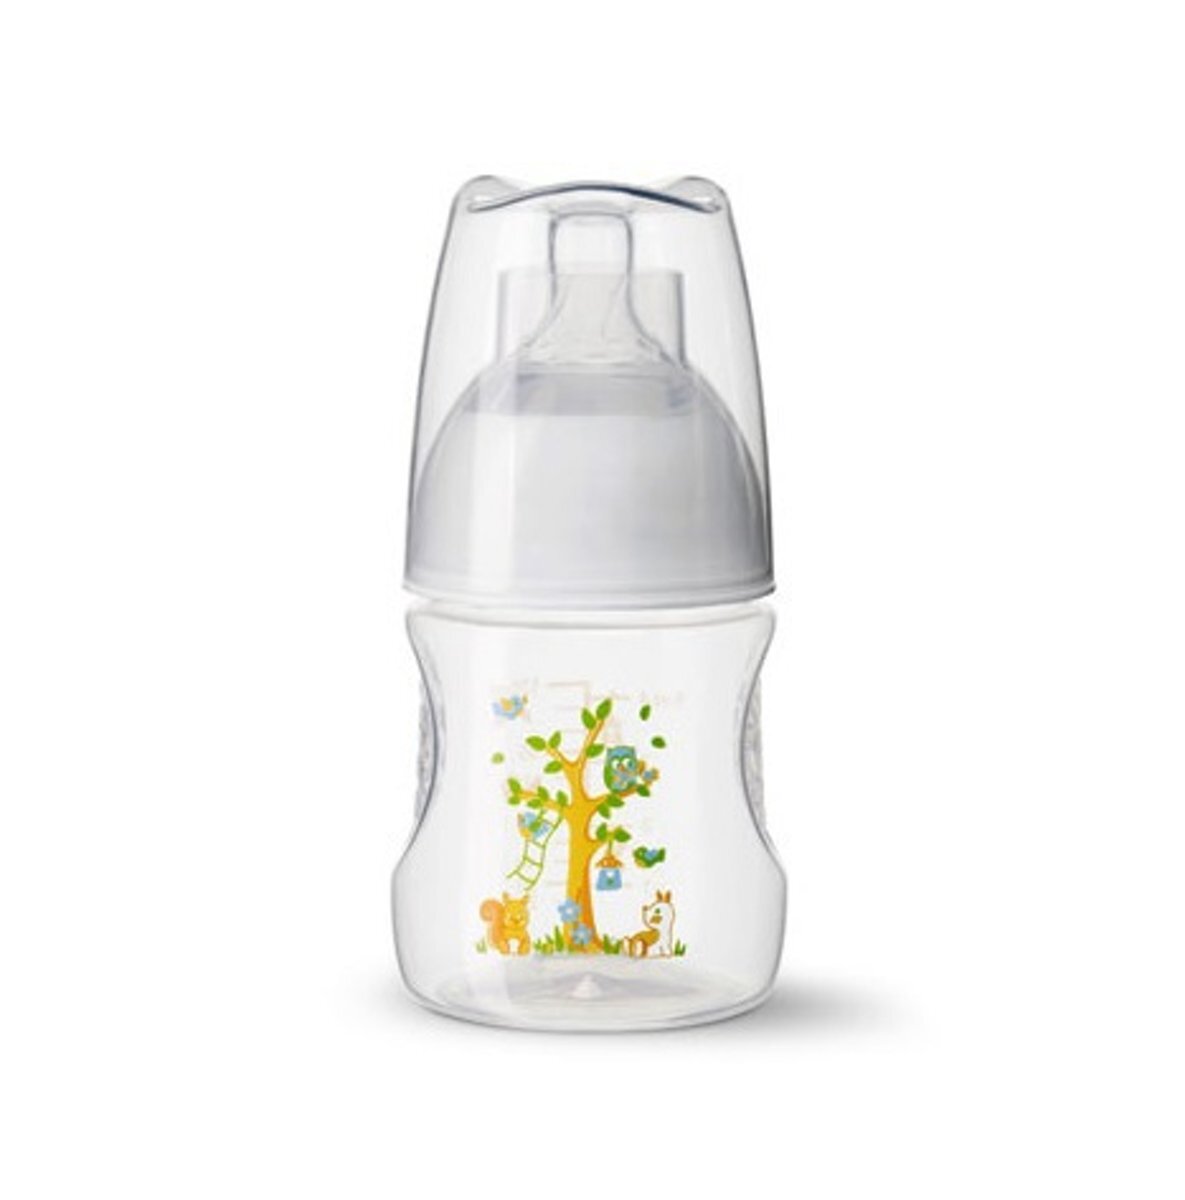 bibi Fles Happiness Play With Us 120ml groen